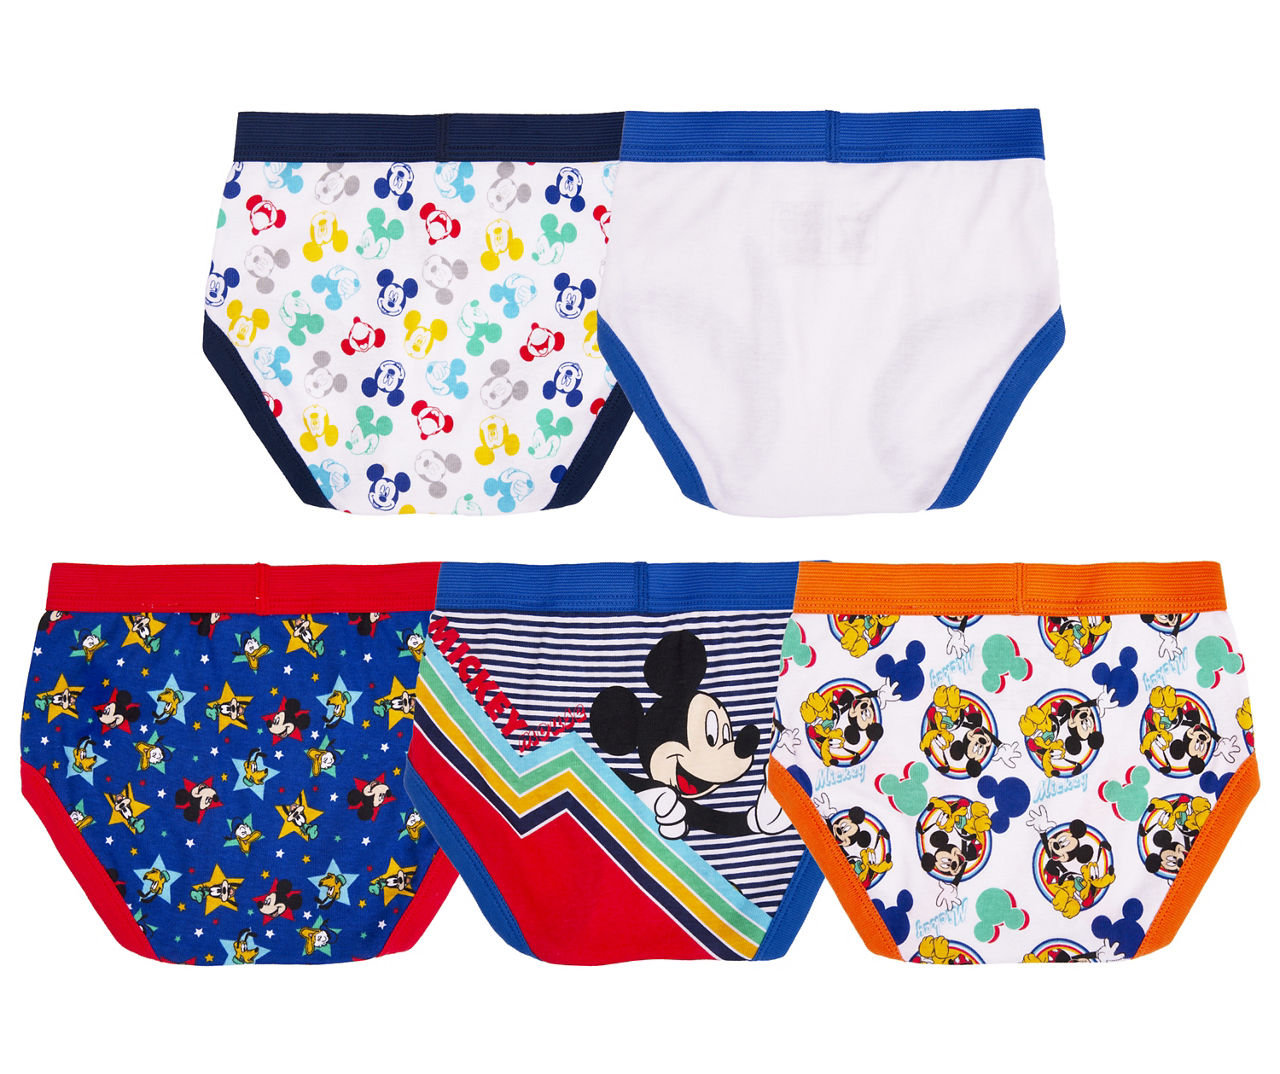 Toddler Size 2T/3T White, Blue & Orange Briefs With Coloring Page